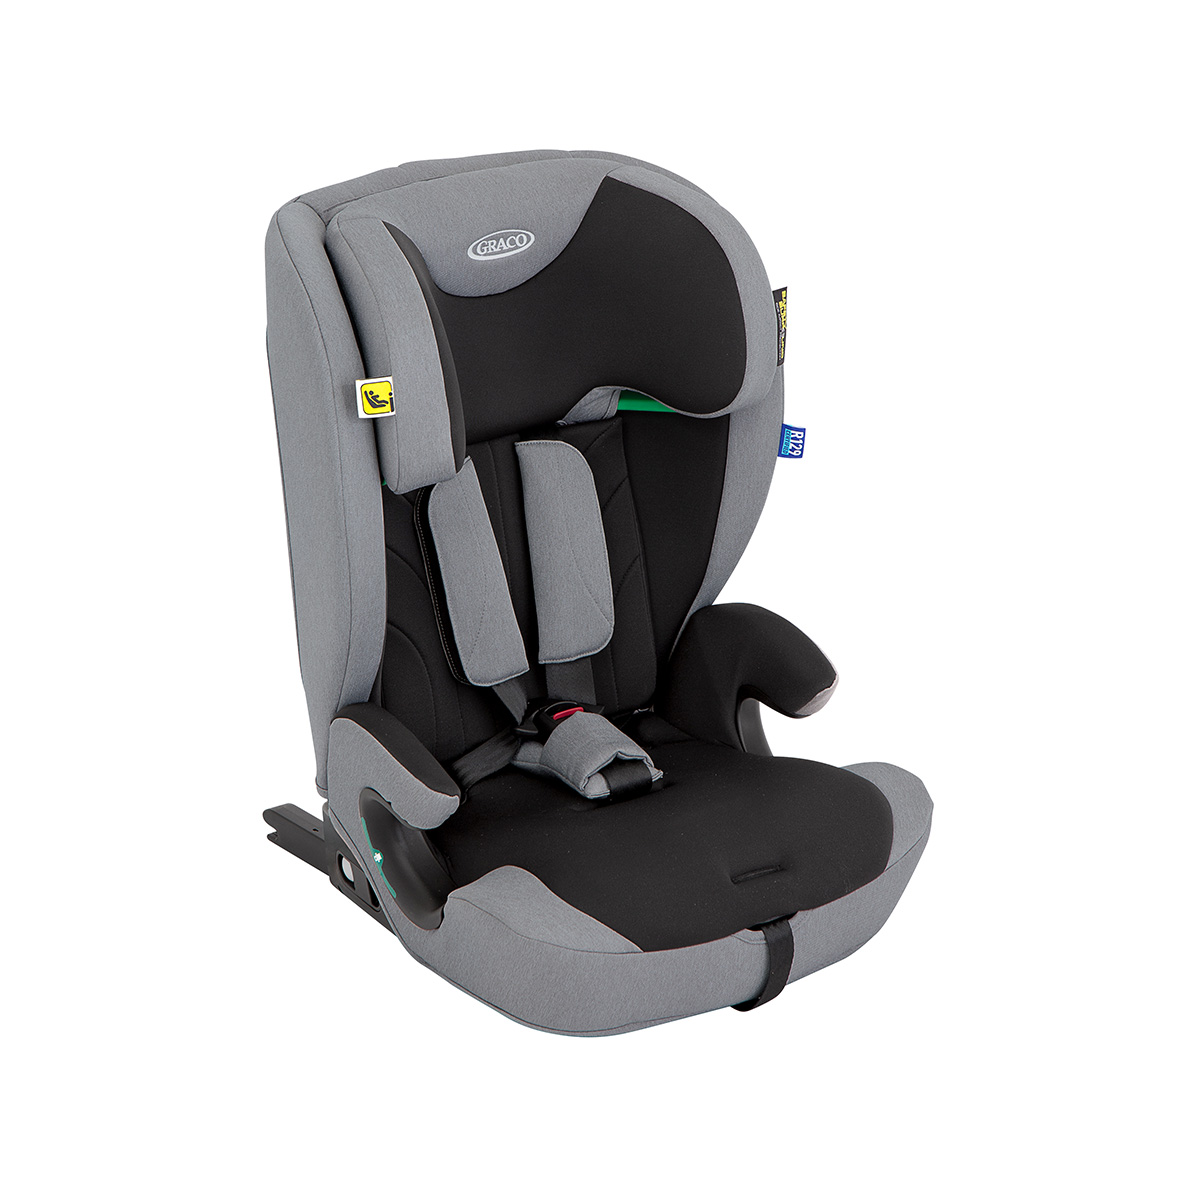 Graco Energi™ i-Size R129 2-in-1 harness booster car seat with ISOFIX and top tether in harness booster mode three quarter angle.
